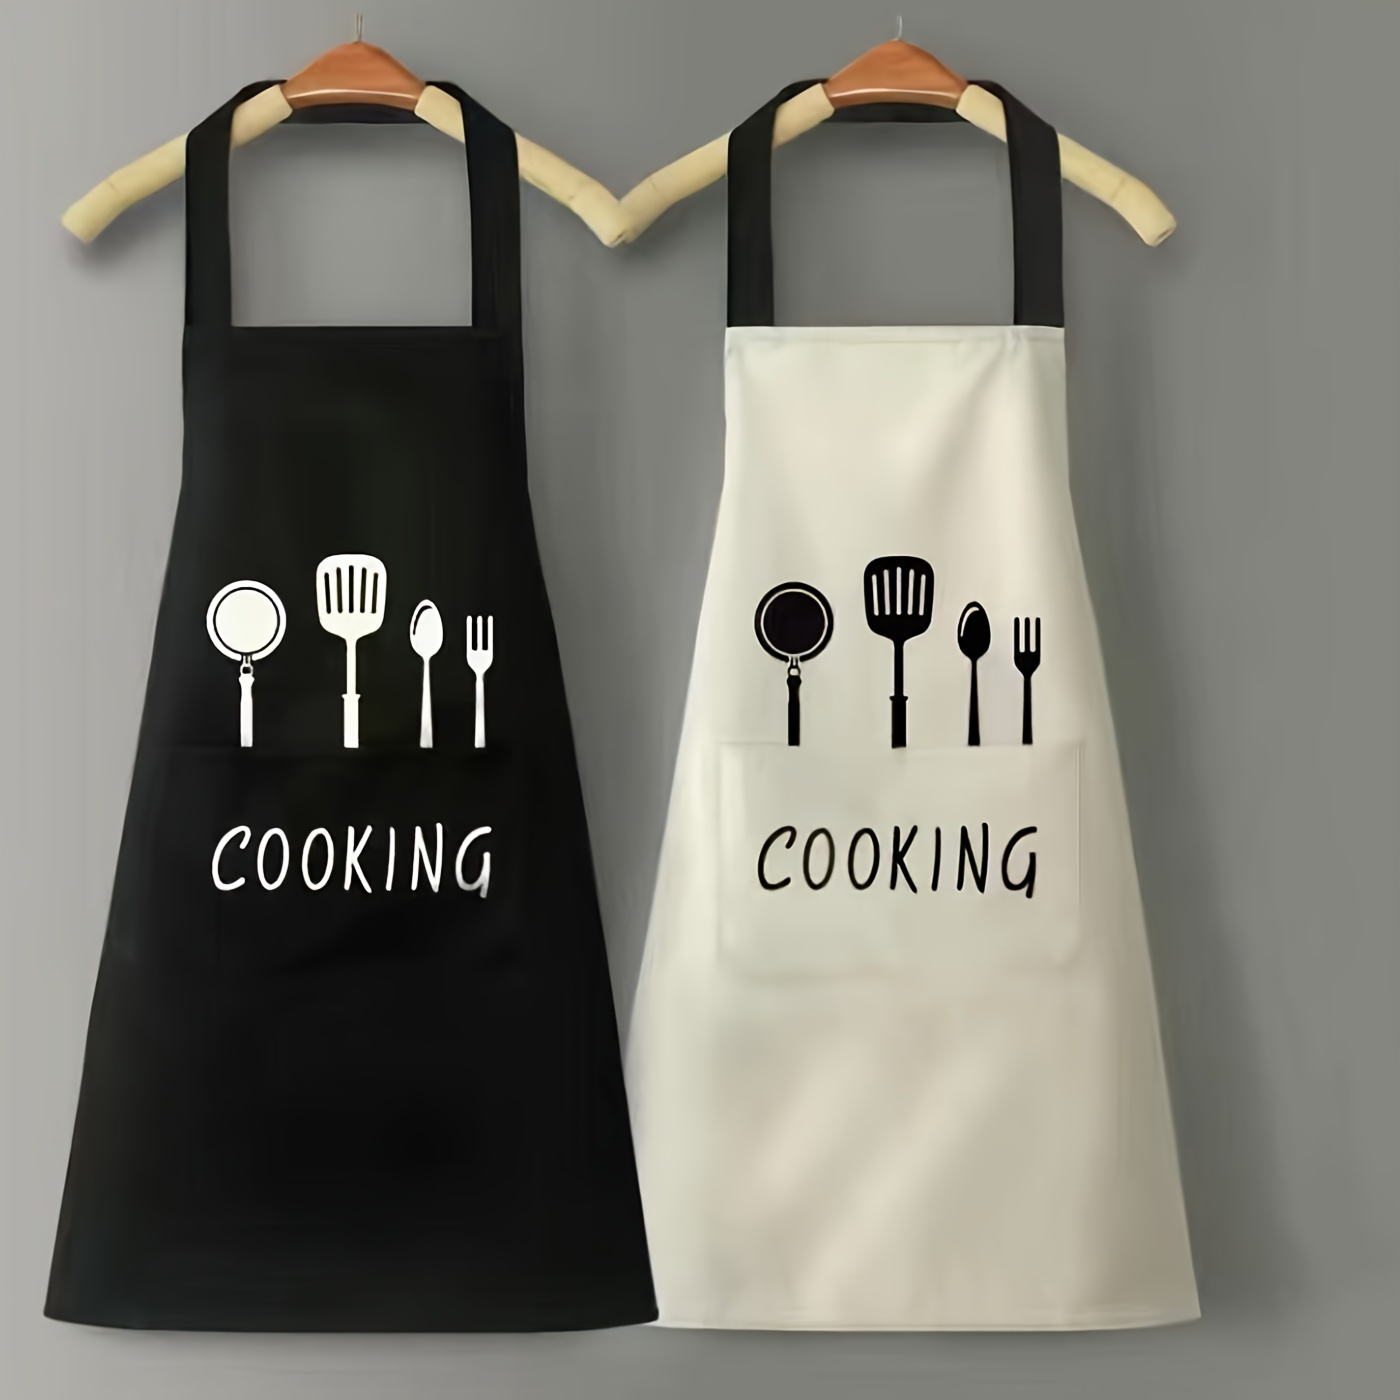 

1pc Waterproof And Oil-proof Apron With Pockets - Hand Wipeable Apron For Women And Men - 27.5in X 26.8in - Stay Clean And Protected While Cooking